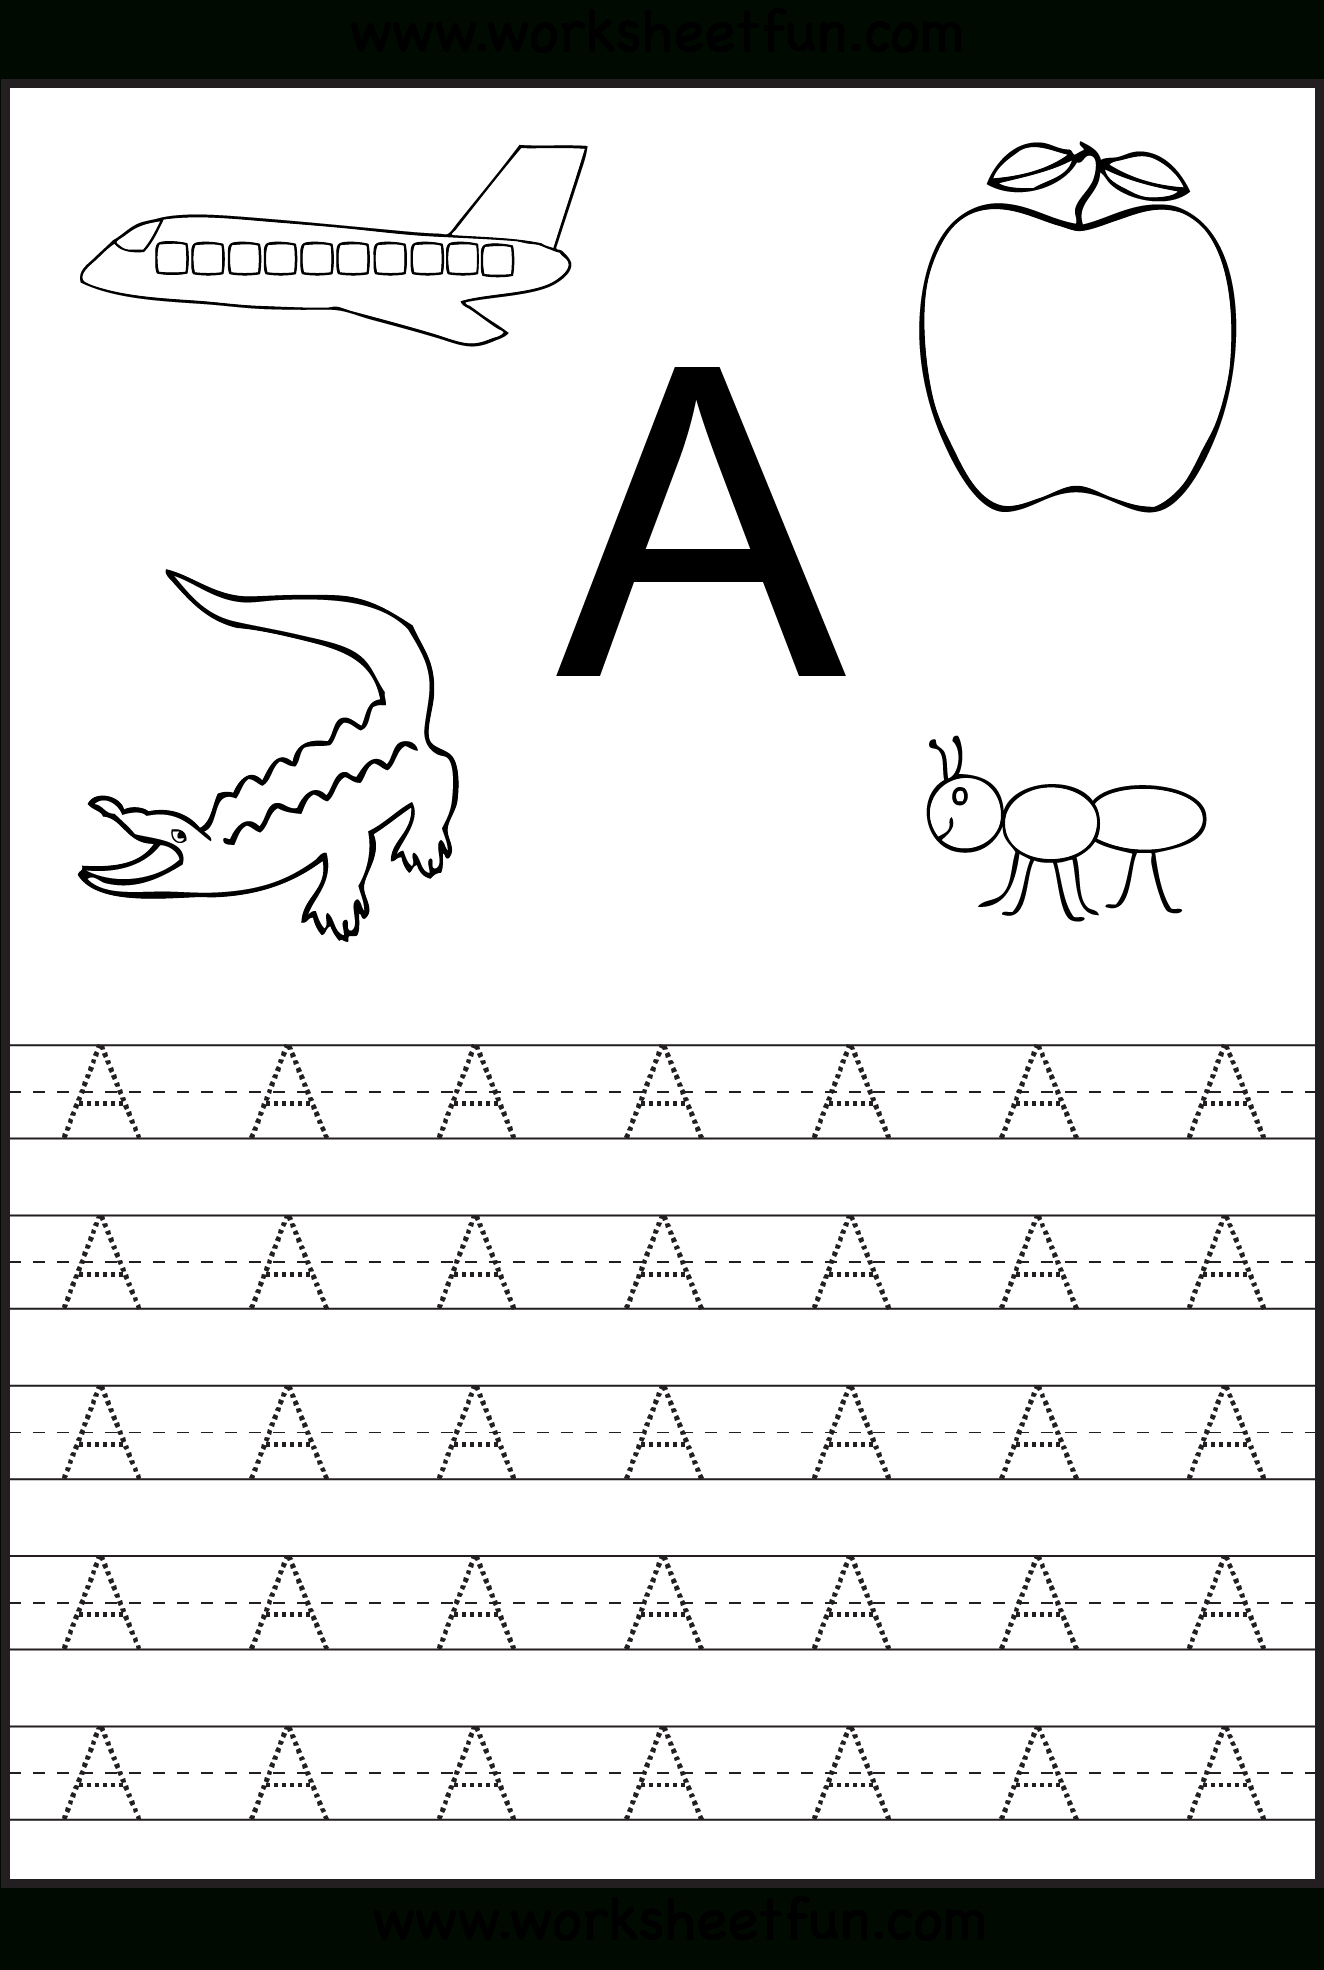 Free Printable Worksheets: Letter Tracing Worksheets For | Free Printable Tracing Worksheets For Preschoolers